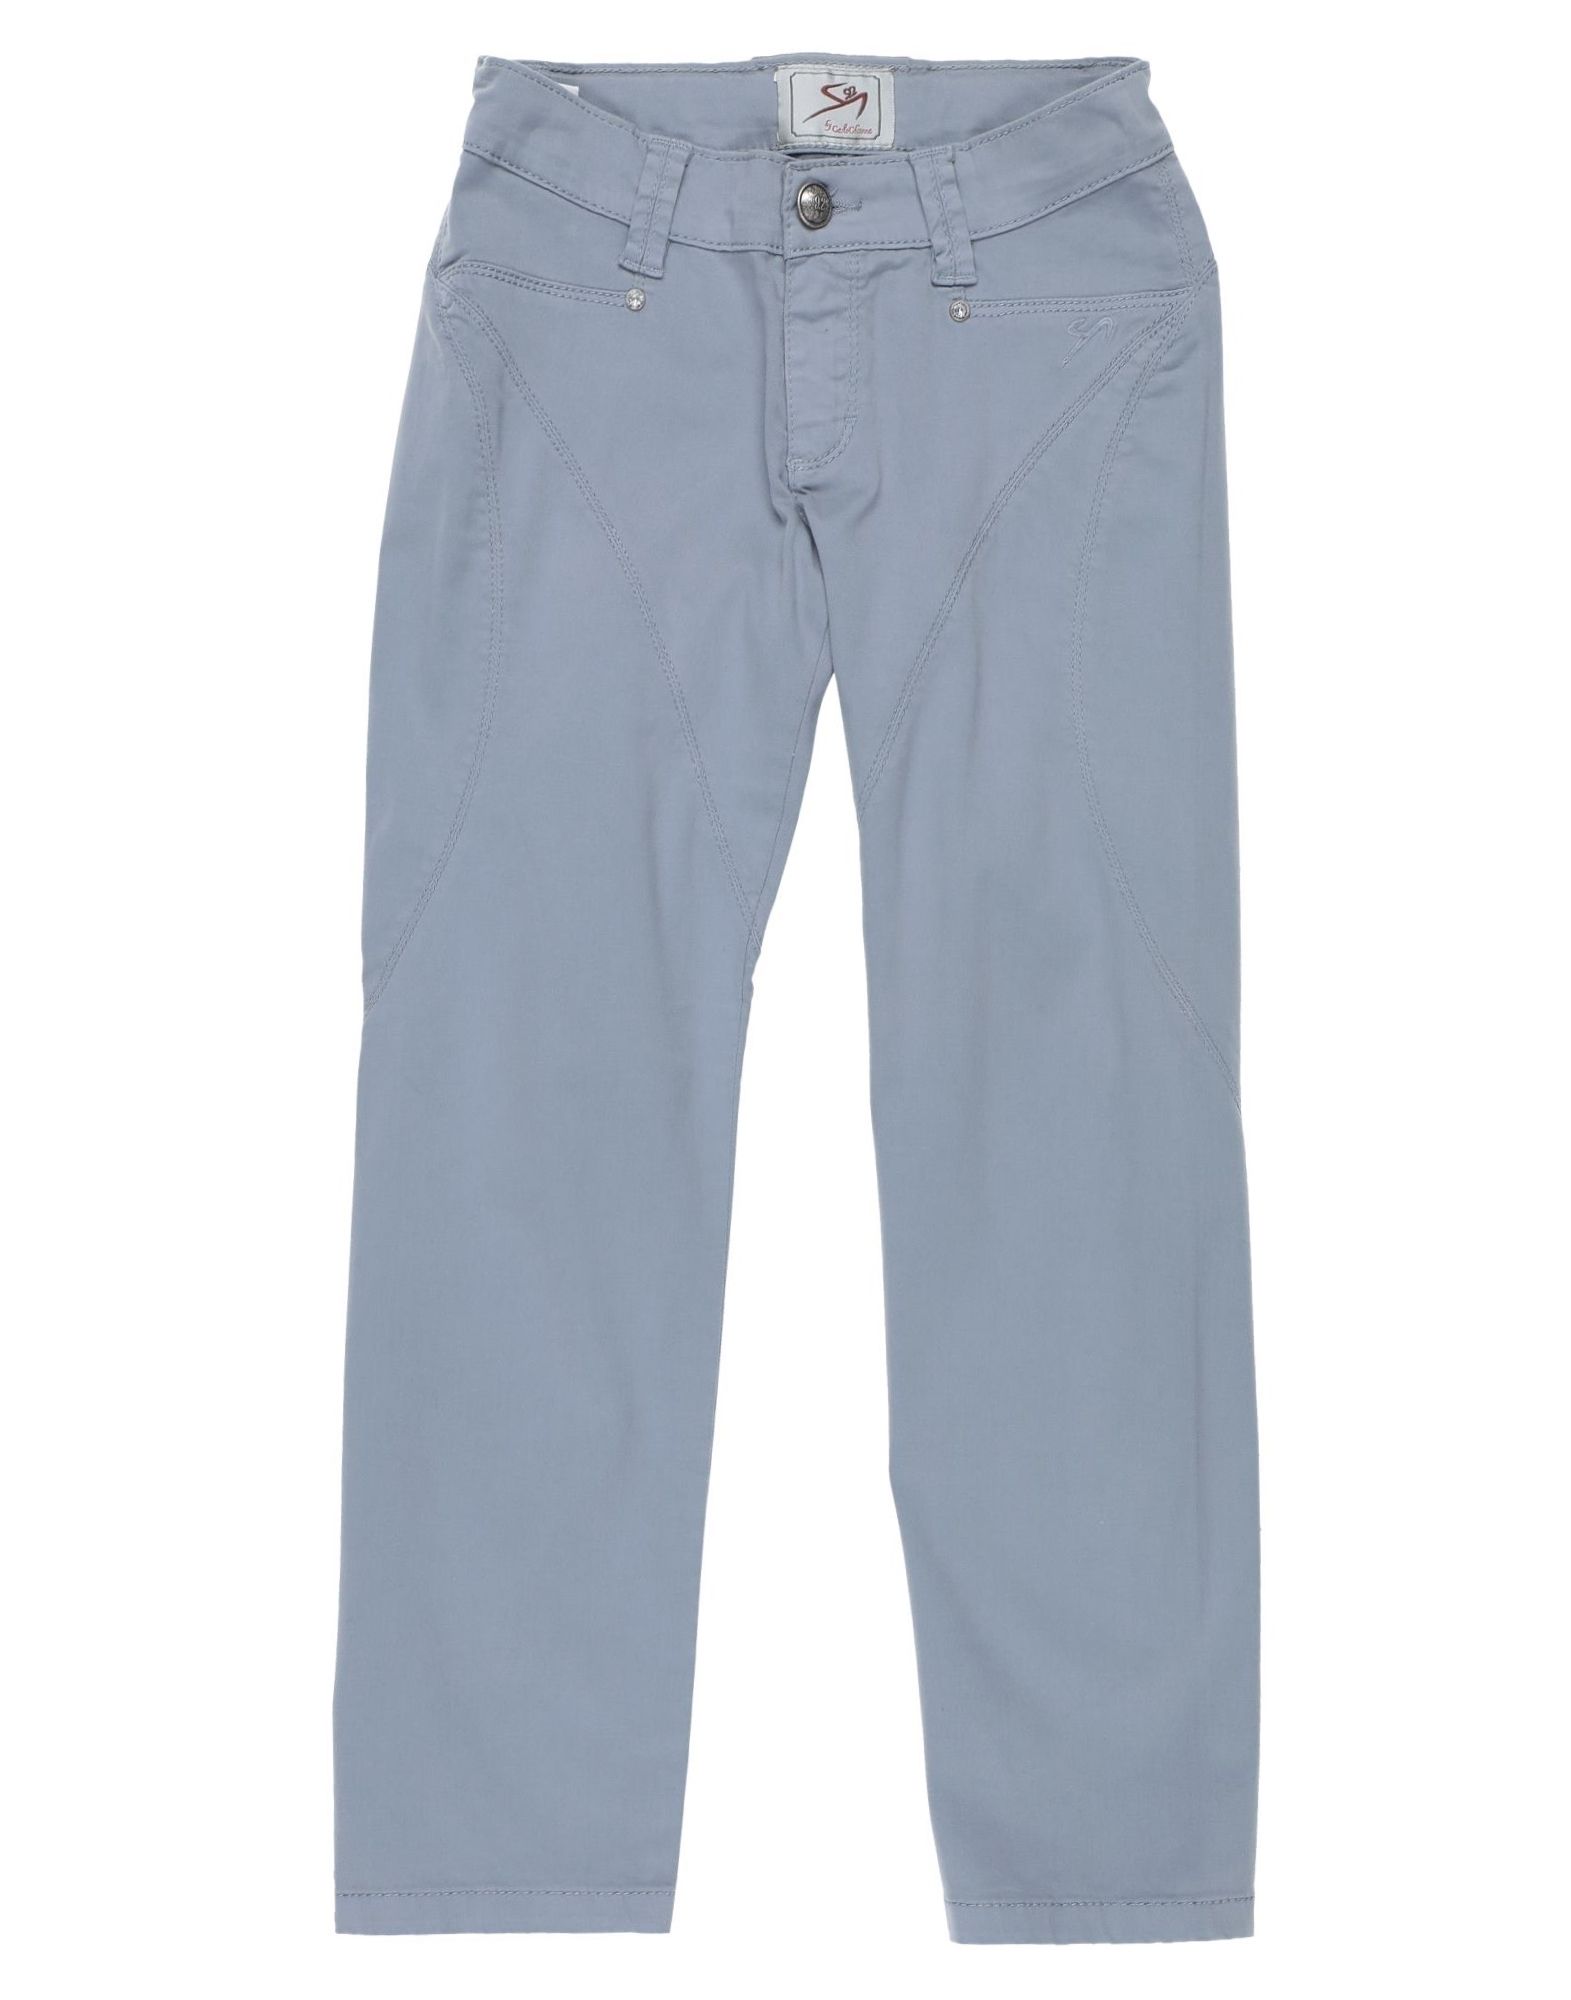 9.2 By Carlo Chionna Kids' Pants In Blue